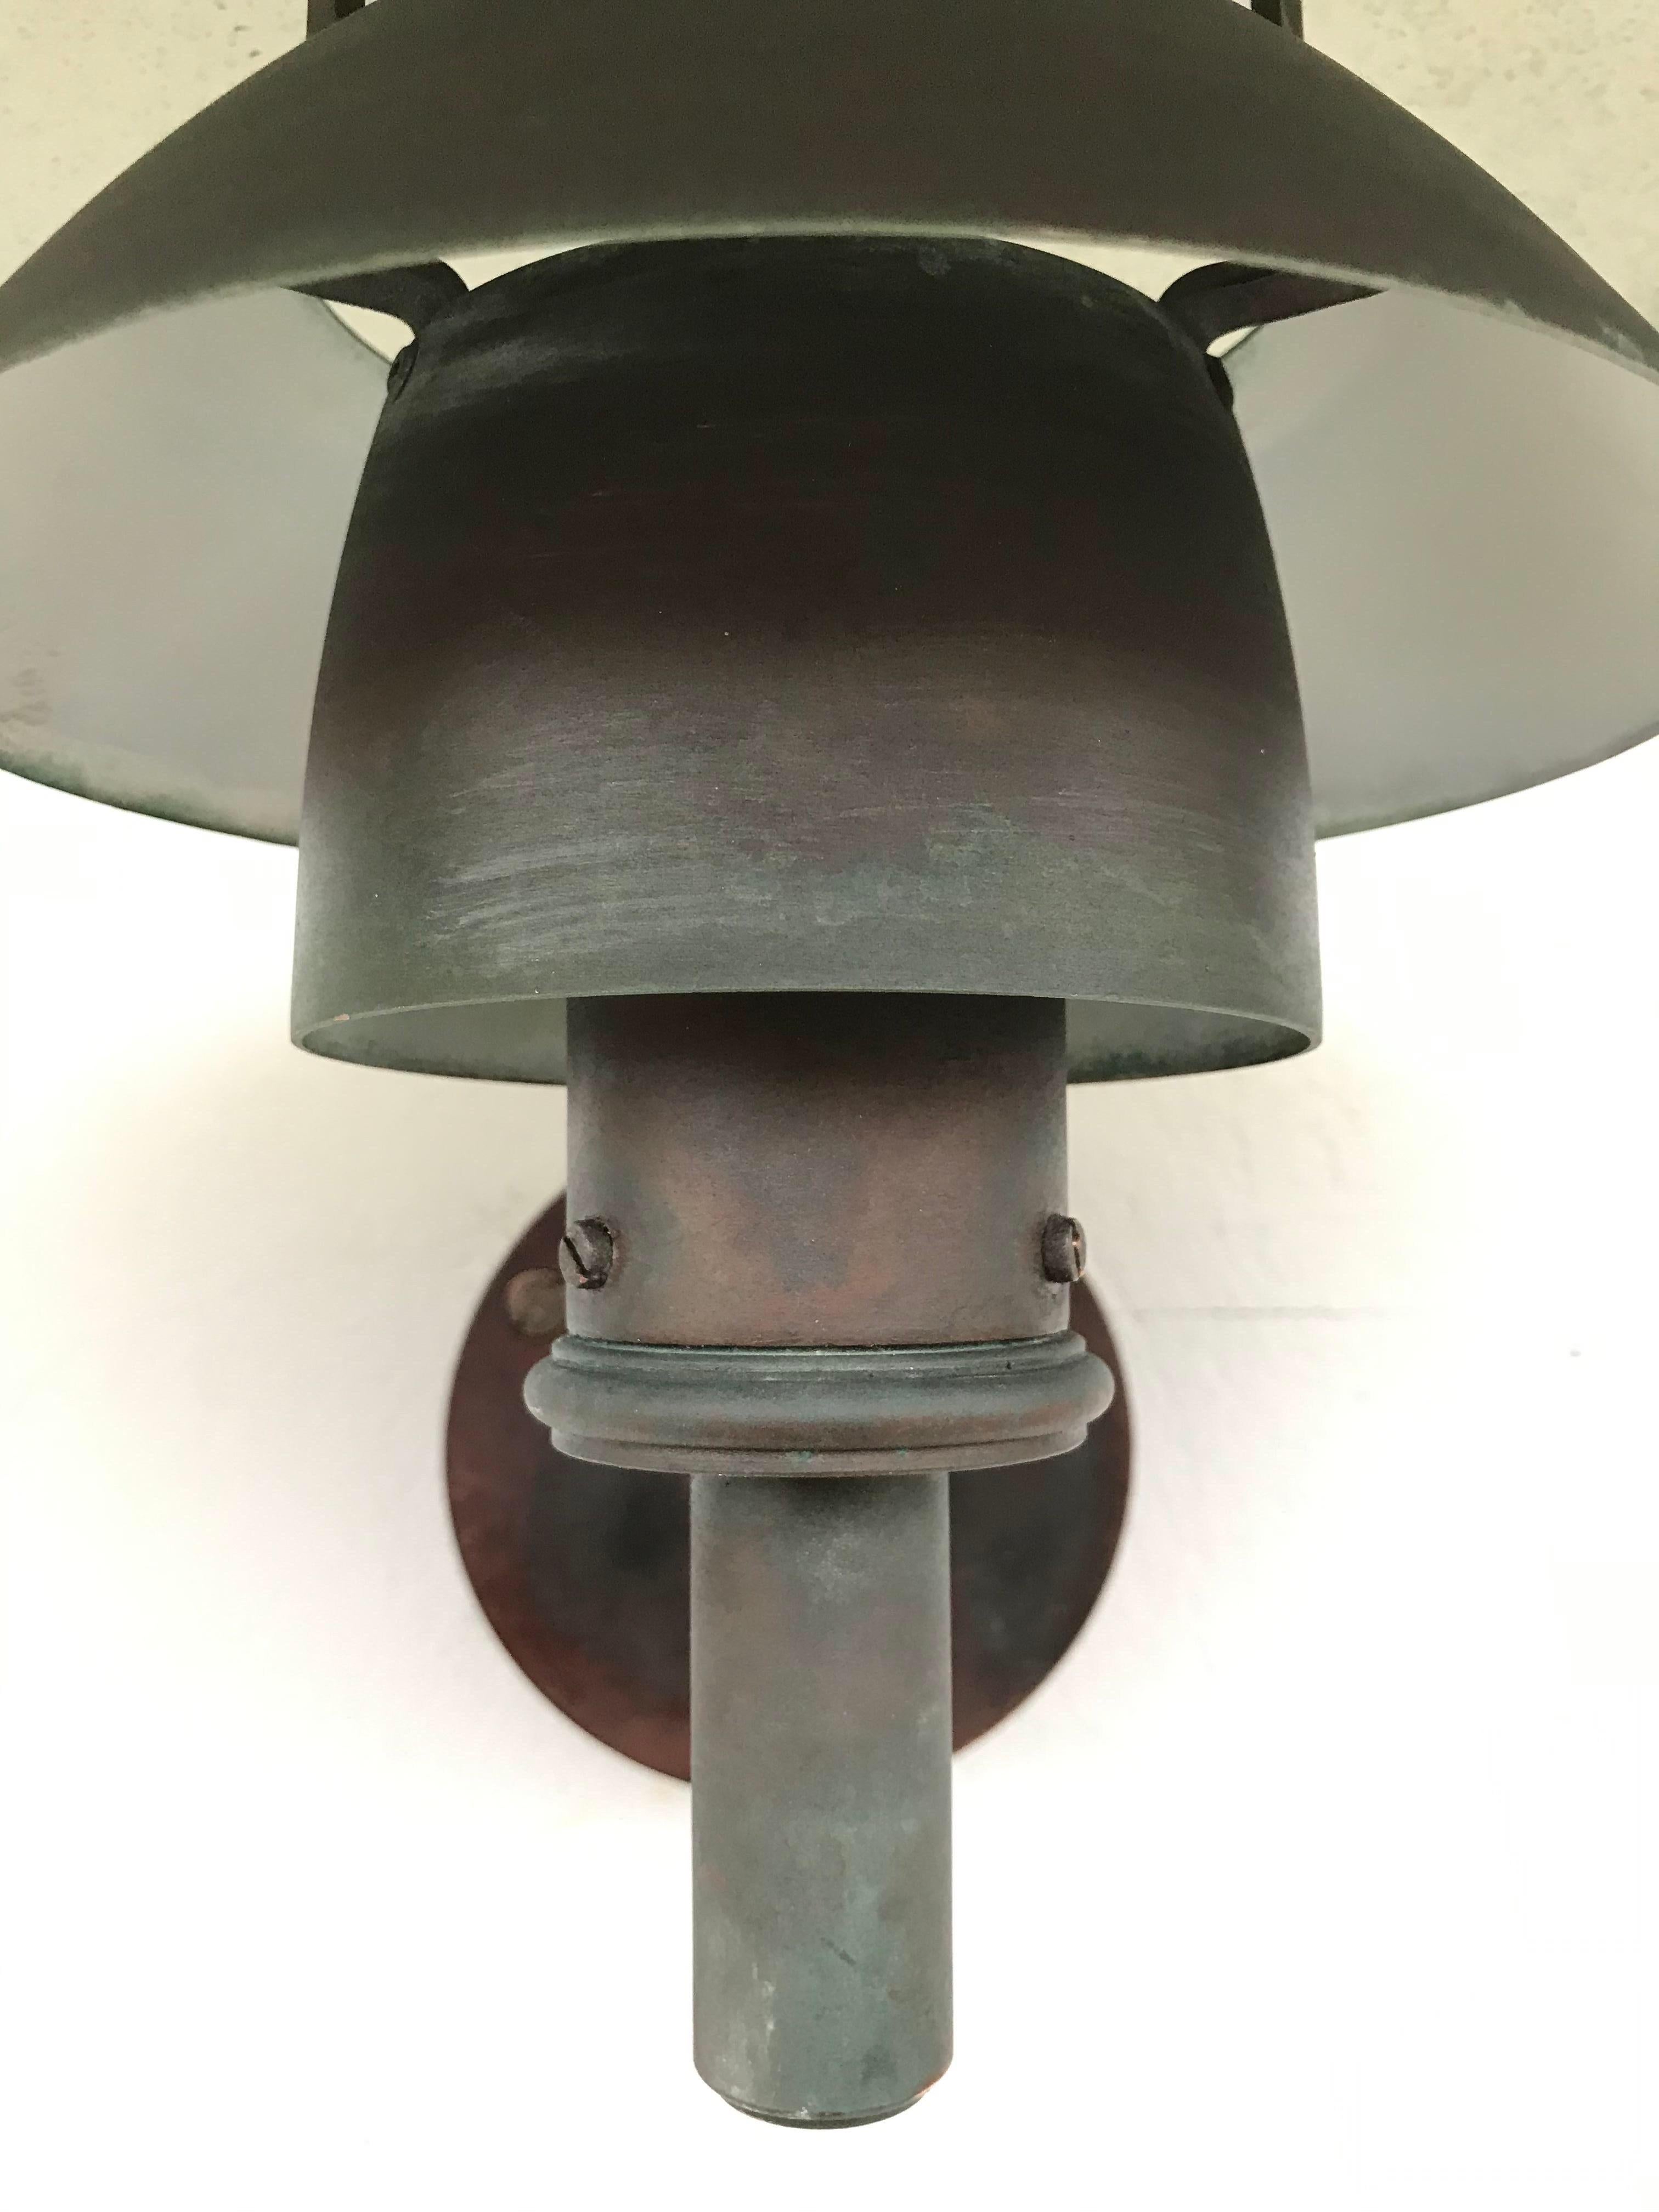 Pair of iconic Vintage Poul Henningsen Copper Wall Lamps by Louis Poulsen of DK 2